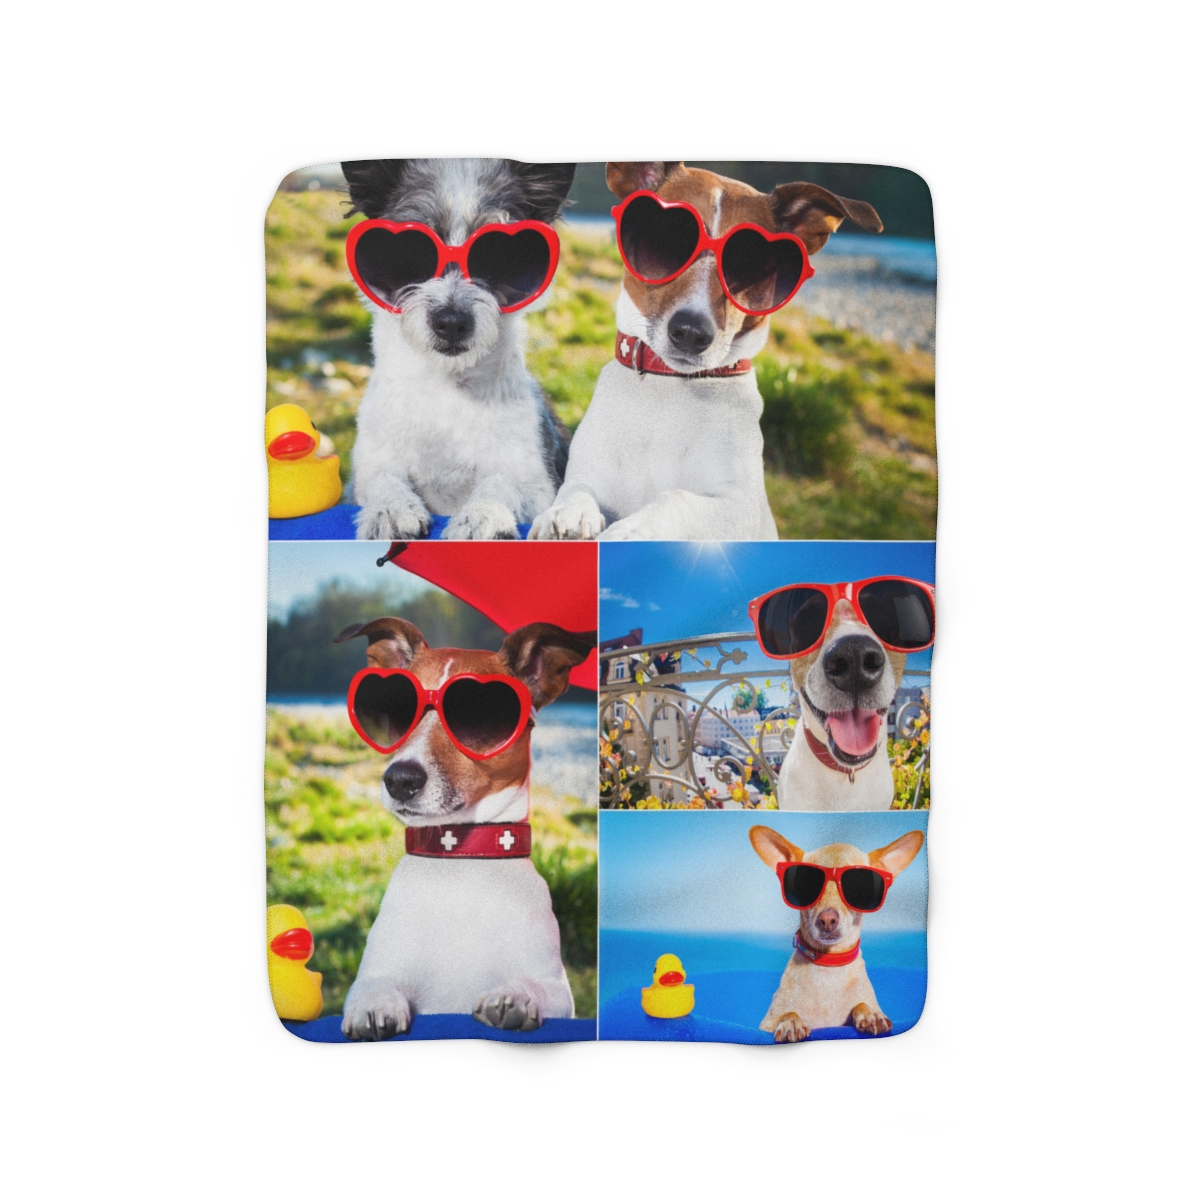 A great alternative to photo books is printing your pets photos onto a plush fleece blanket. How fun!